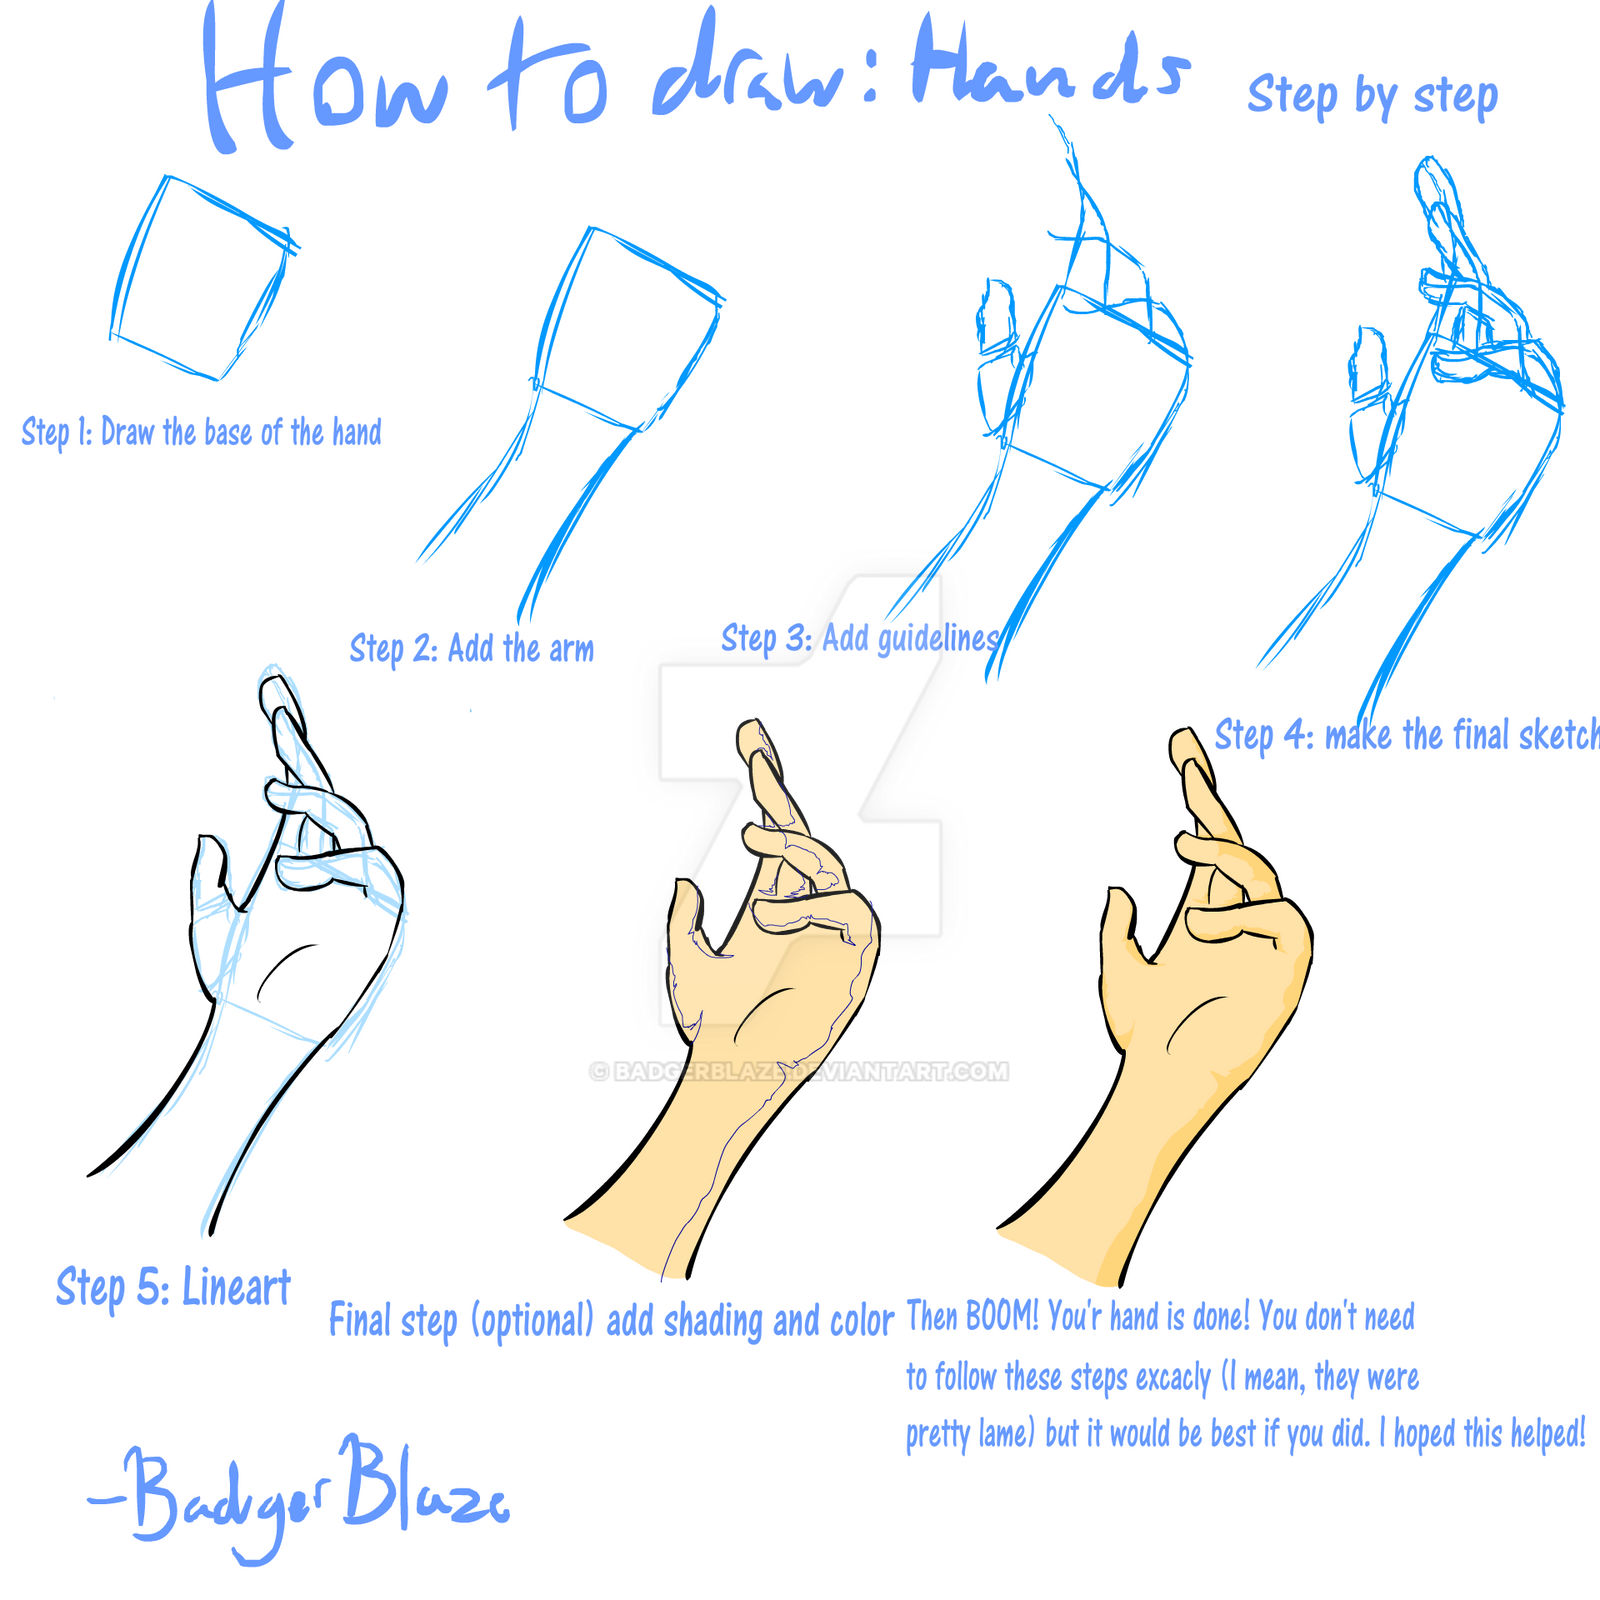 How to draw: Hands! by BadgerBlaze on DeviantArt